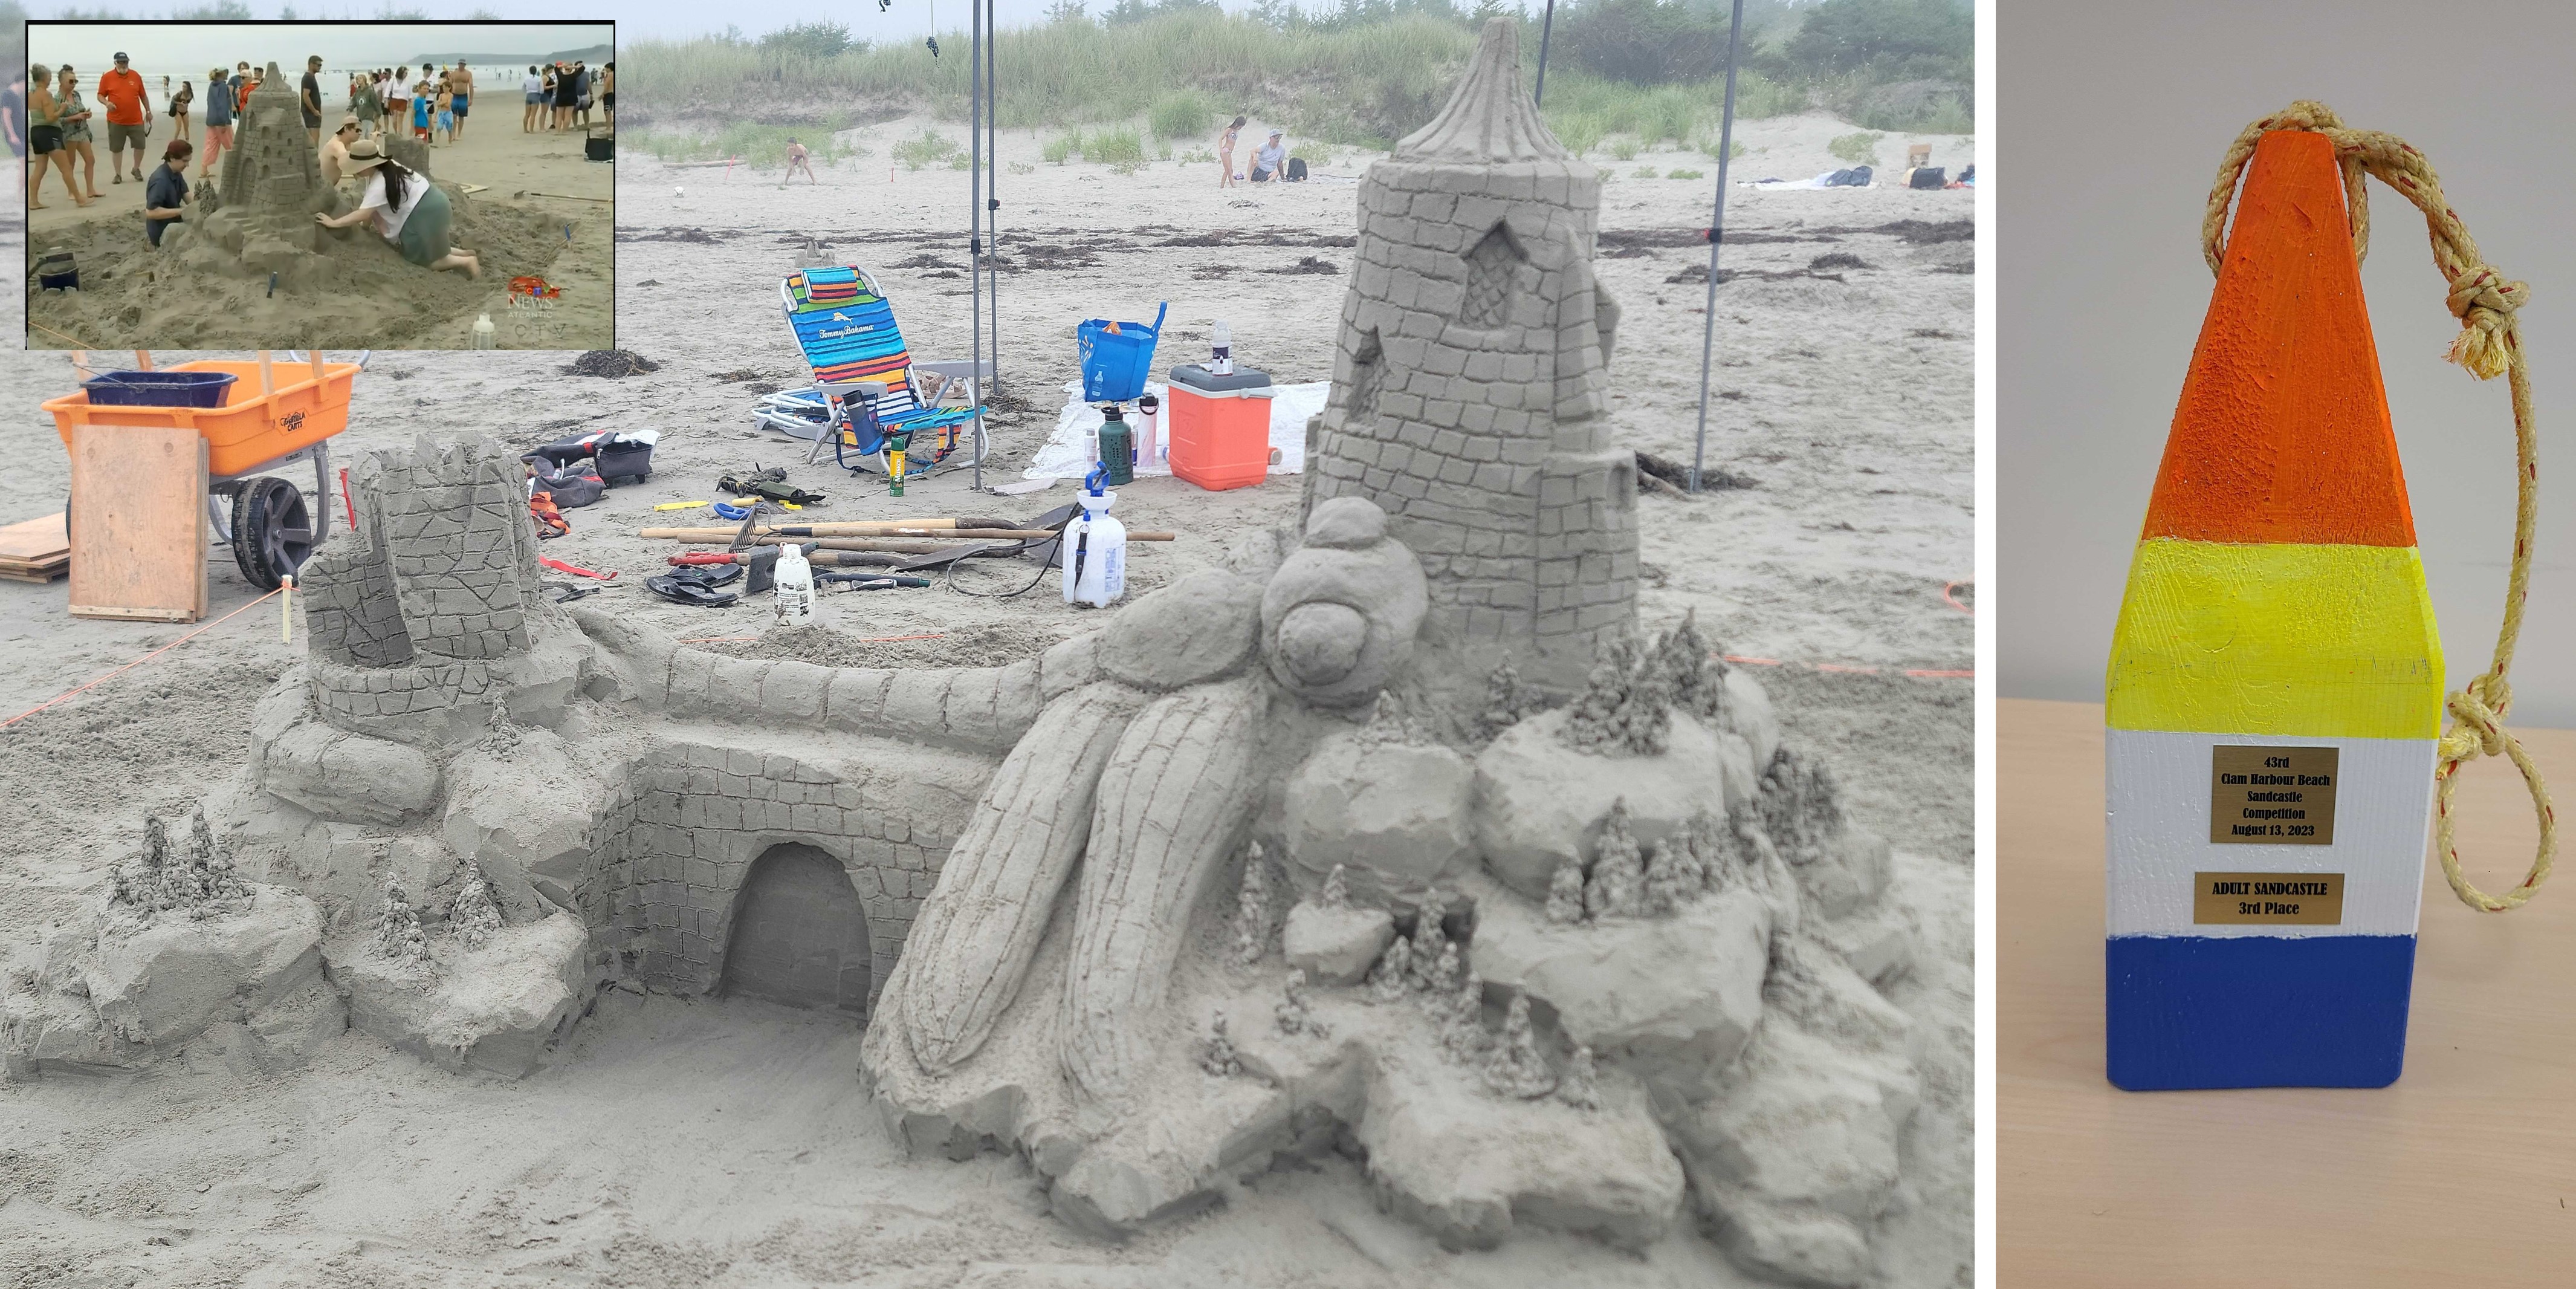 Sand sculpture of a dragonfly attacking a castle, with a photo of the third-place buoy trophy next to it. 